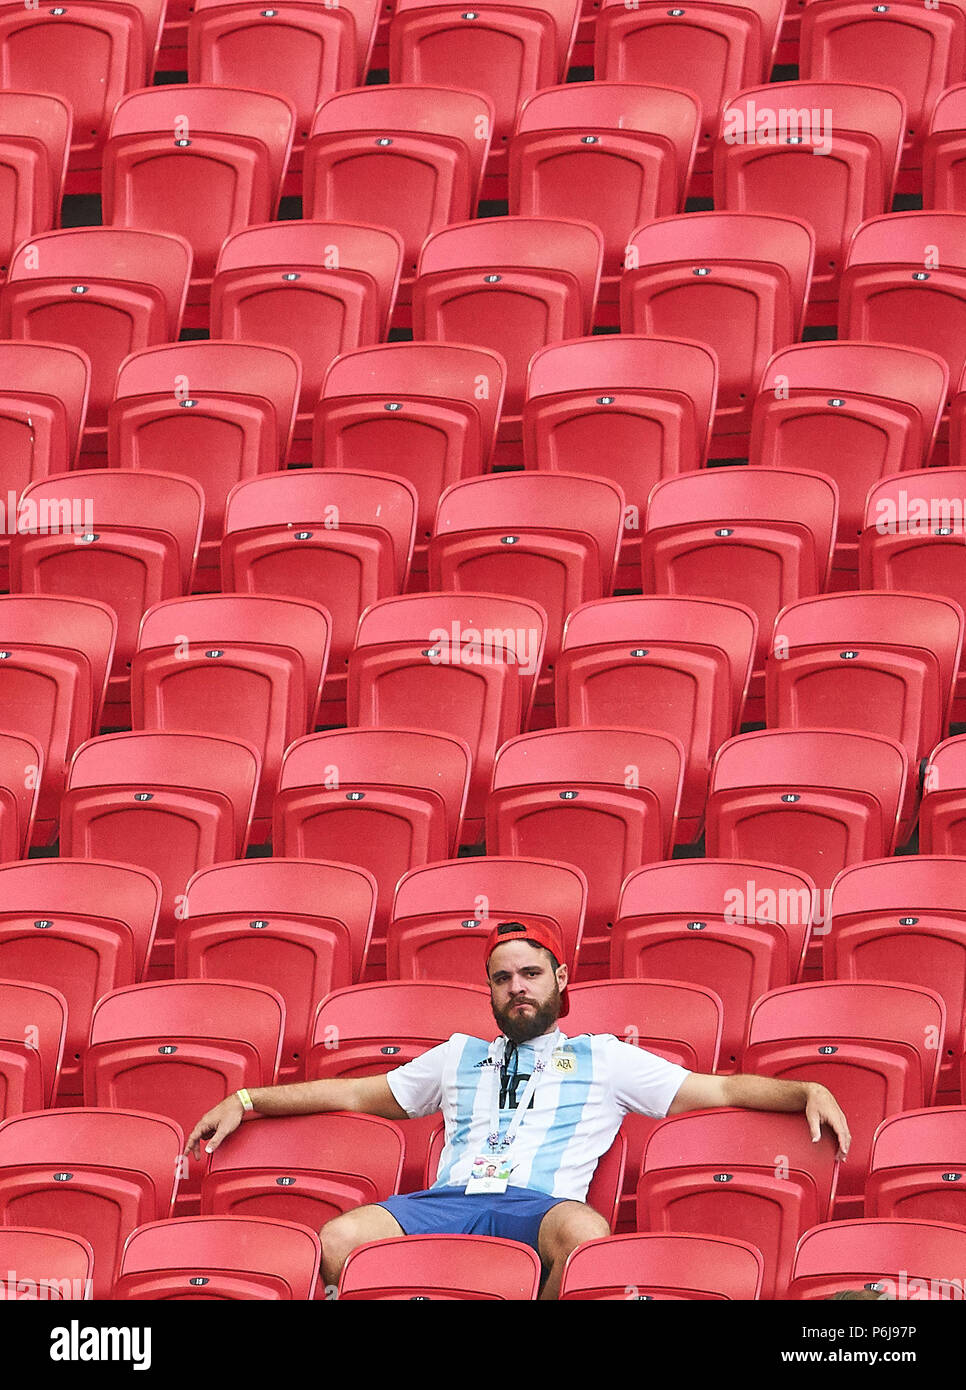 Kazan, Russia, June 30, 2018 argentina fan, sad, disappointed, angry, Emotions, disappointment, frustration, frustrated, sadness, desperate, despair,  ARGENTINA - FRANCE FIFA WORLD CUP 2018 RUSSIA, Best of 16 , Season 2018/2019,  June 30, 2018  Stadium K a z a n - A r e n a in Kazan, Russia. © Peter Schatz / Alamy Live News Stock Photo